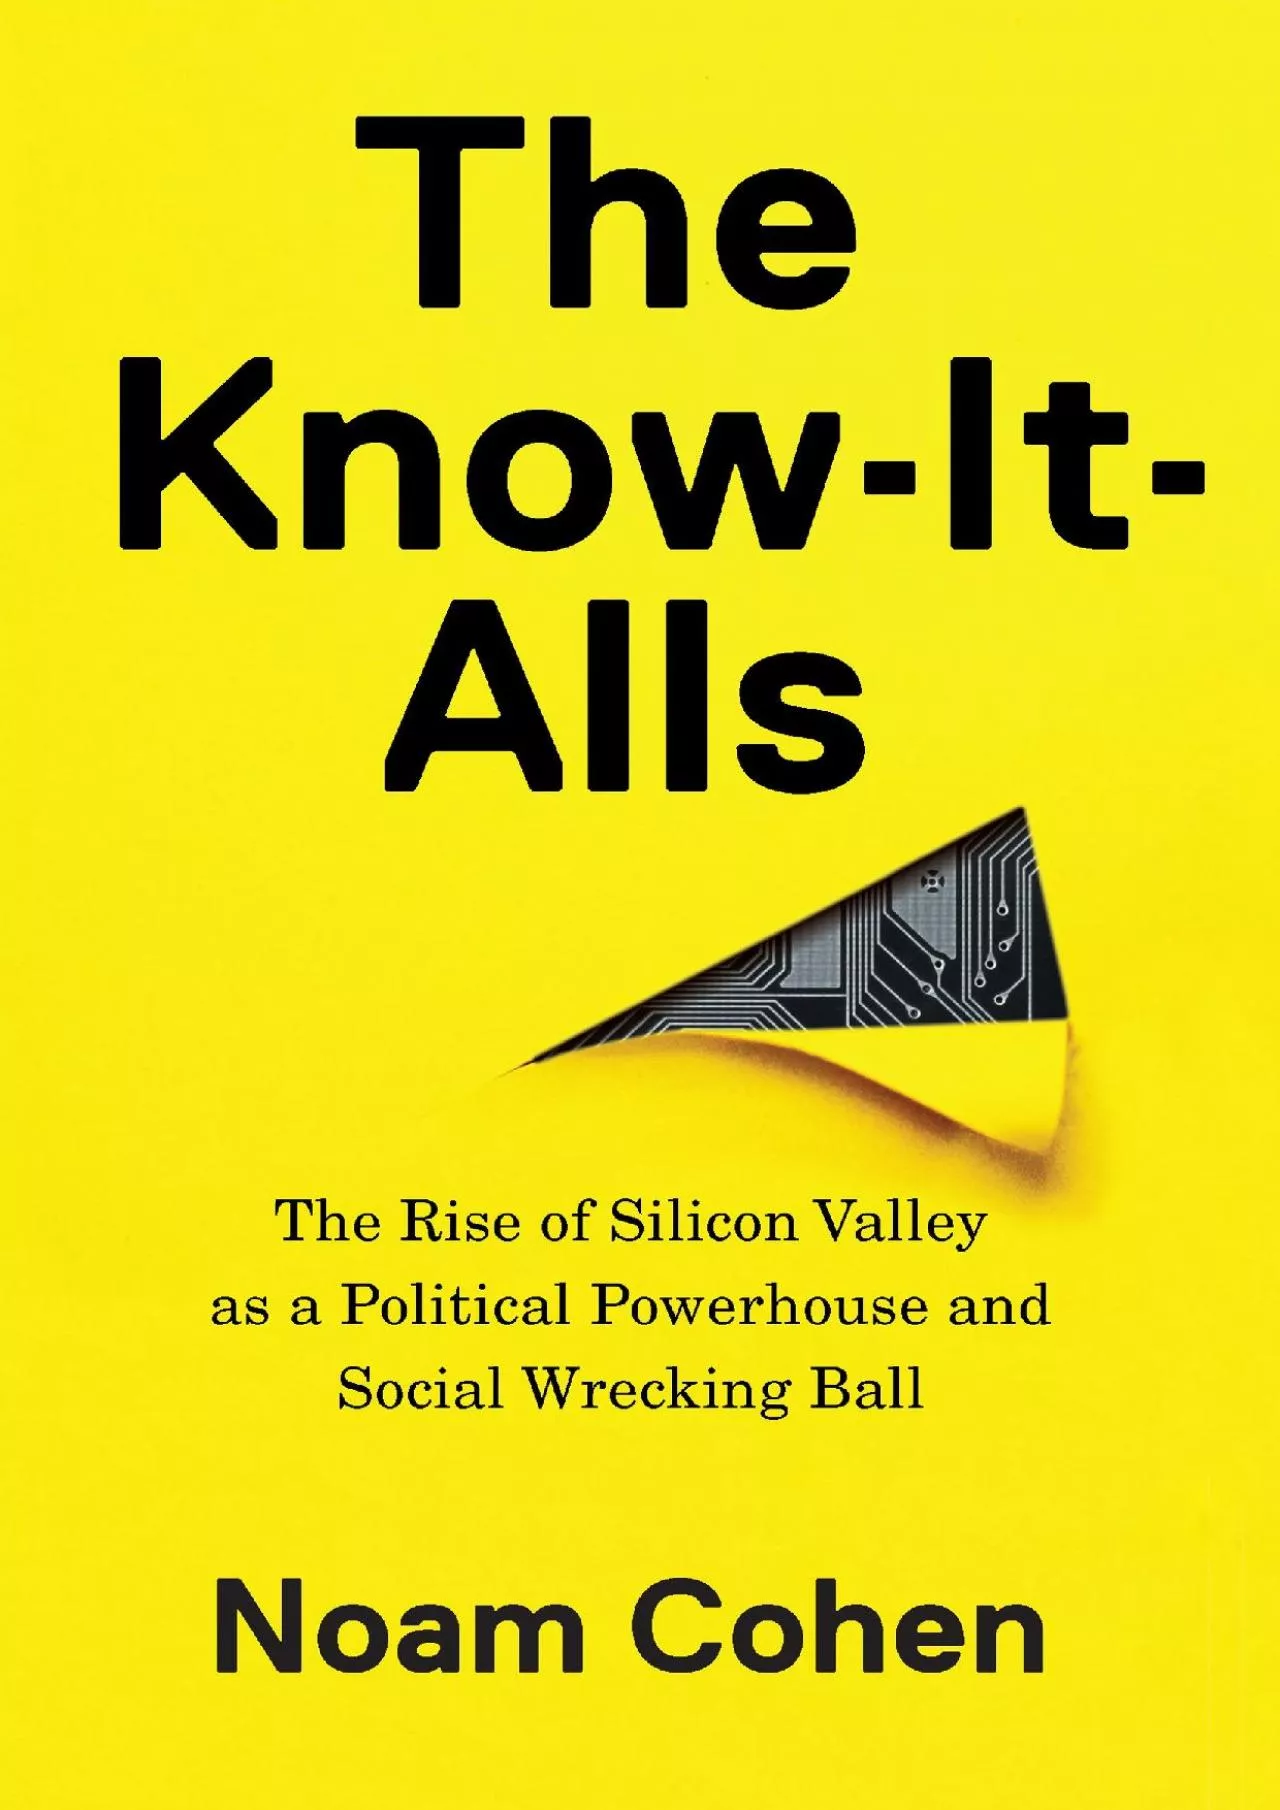 The Know-It-Alls: The Rise of Silicon Valley as a Political Powerhouse and Social Wrecking